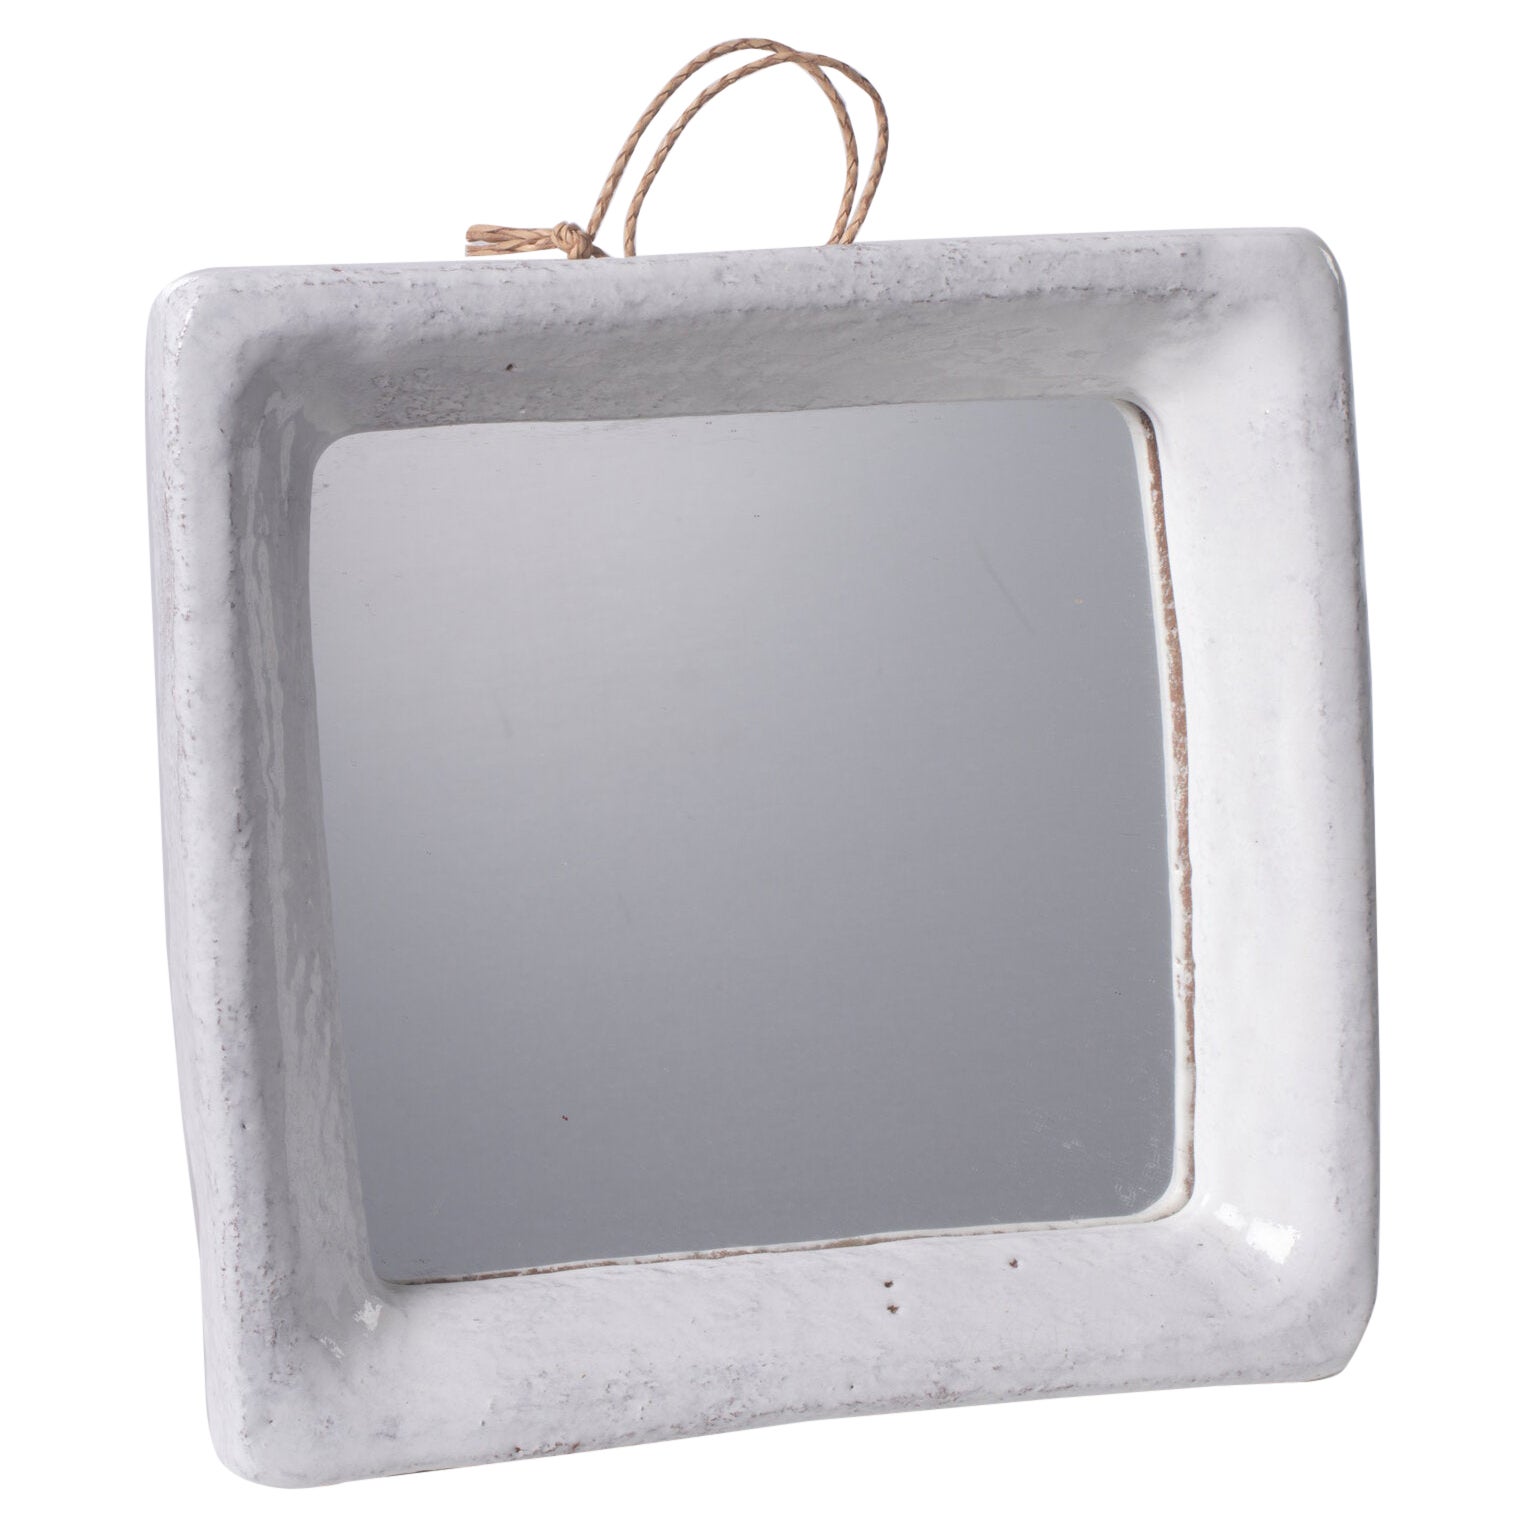 Contemporary White Enamel Ceramic Mirror by Frederic Bourdiec For Sale